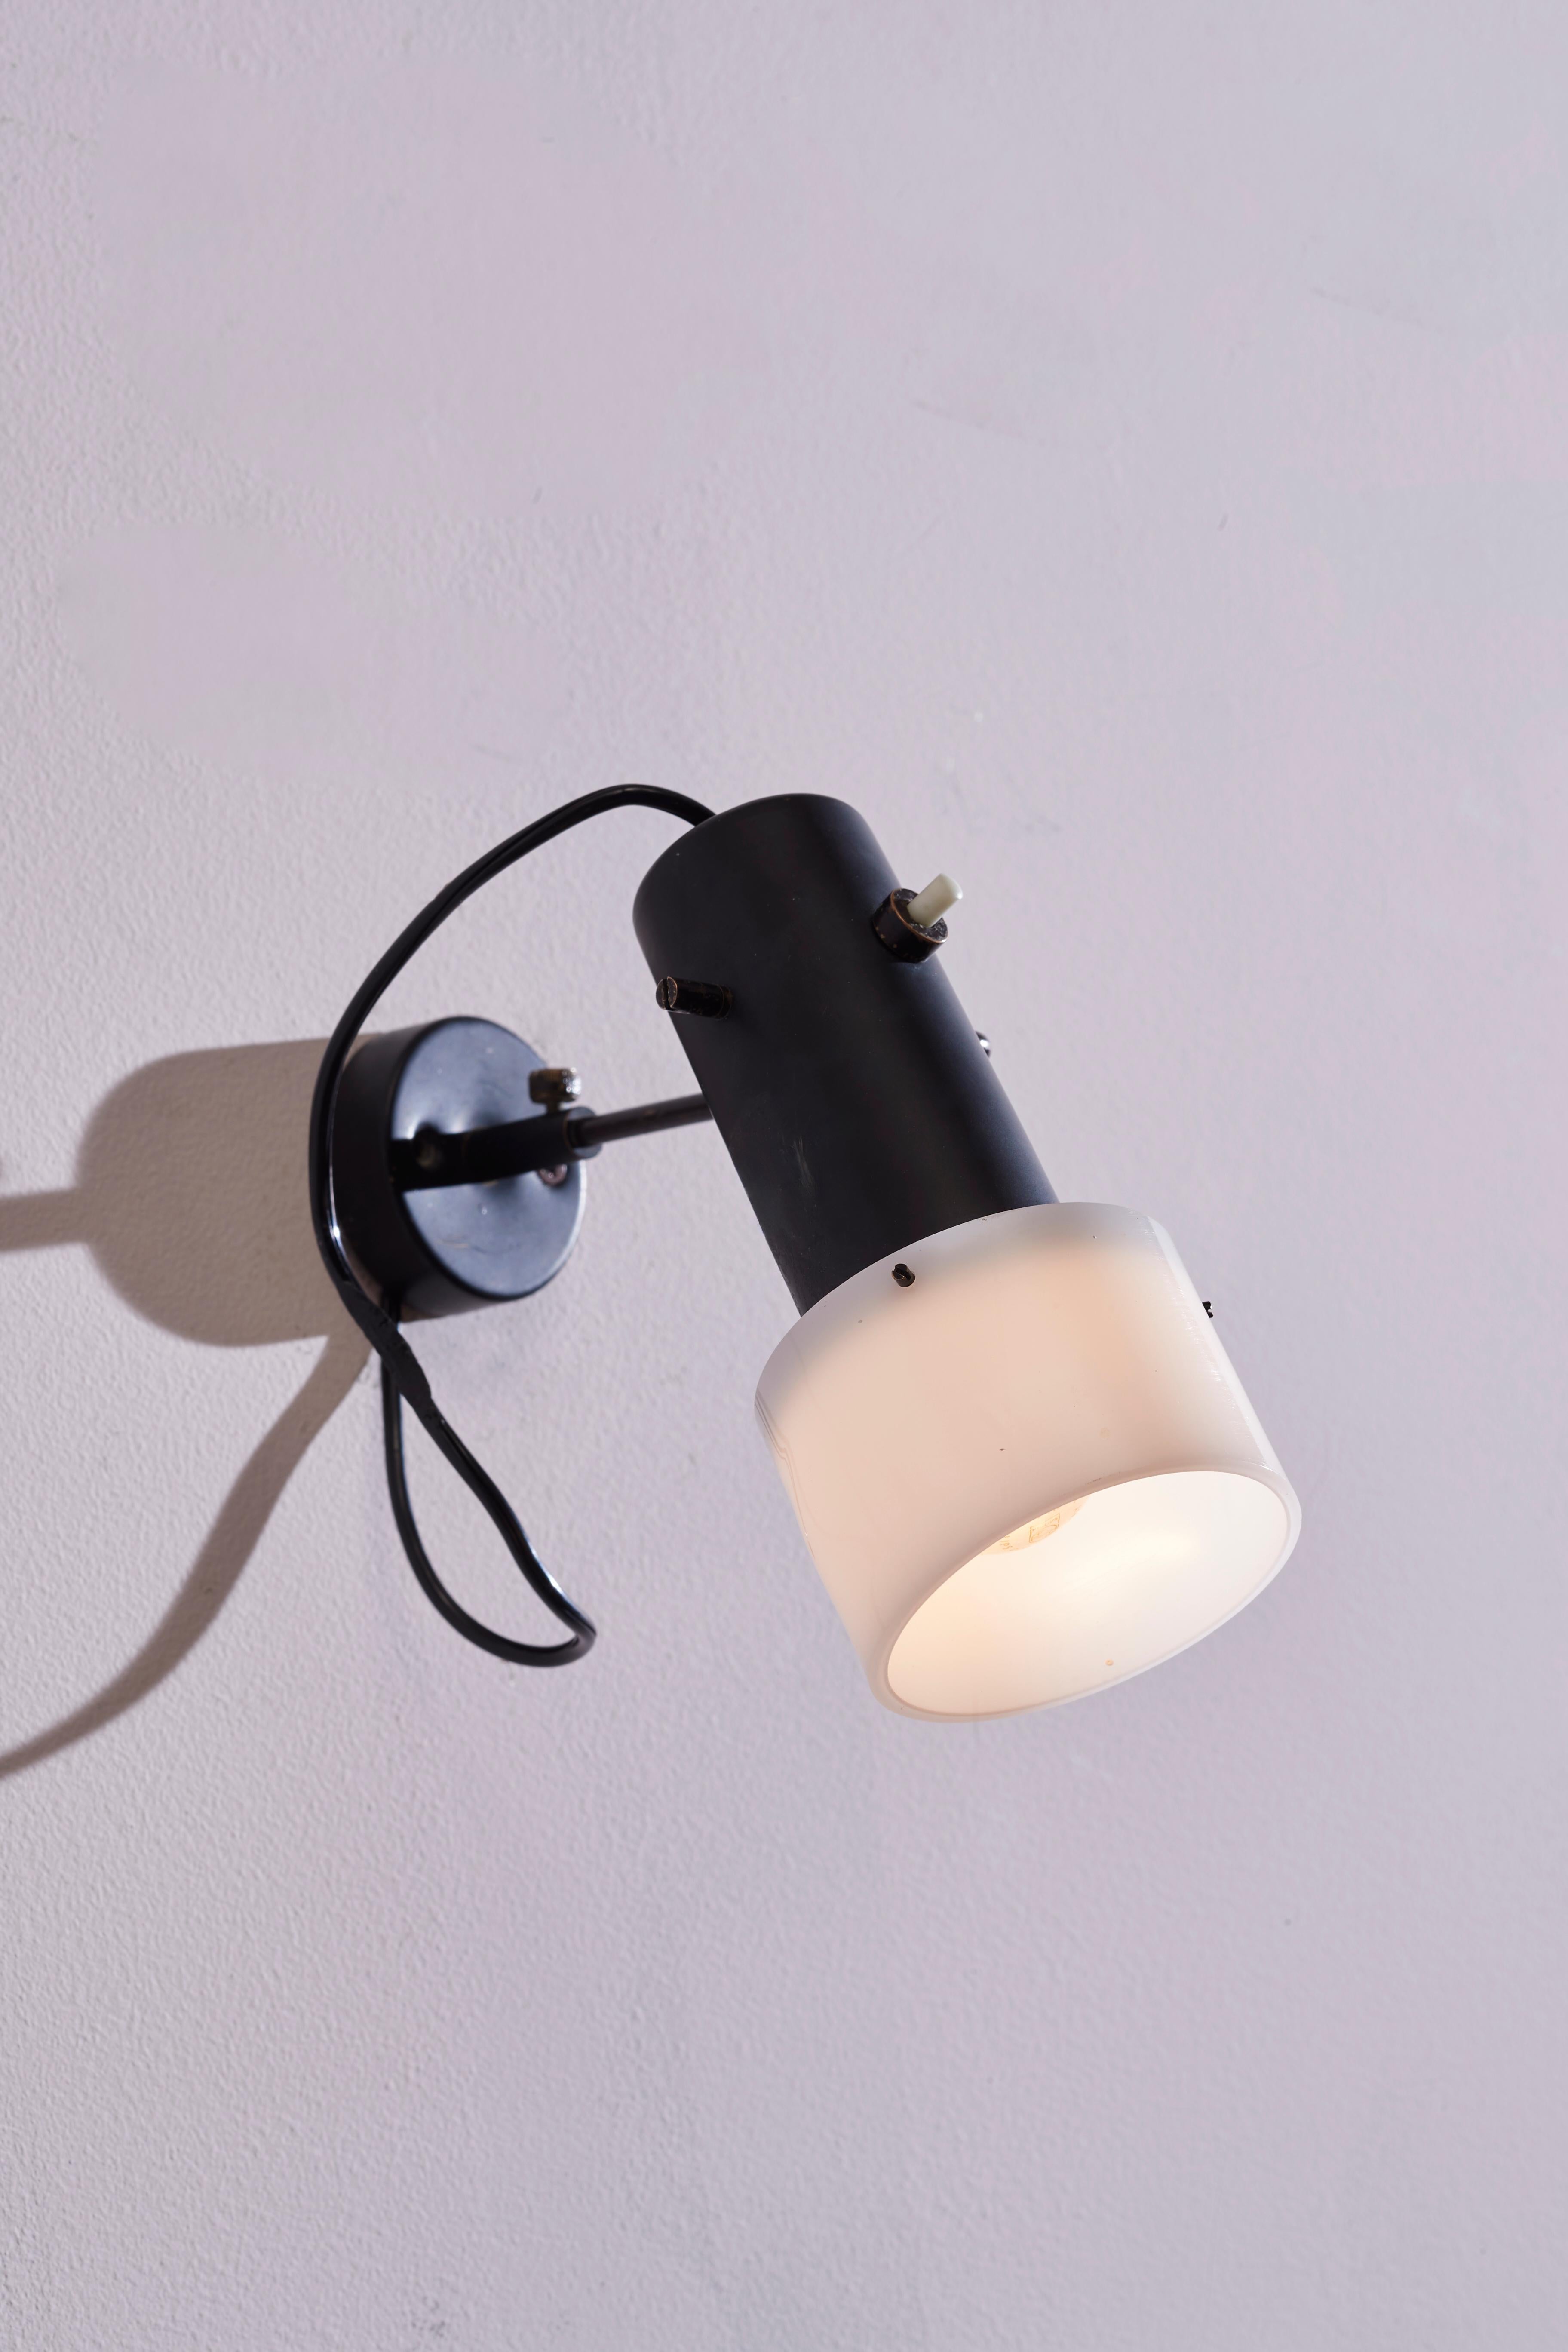 A rare and fascinating adjustable wall lamp of Model 3, designed by Gino Sarfatti and produced by Arteluce in Italy in the 1950s. Characterized by an adjustable lampshade, this lamp is made of black-painted aluminum, with a perspex cover ensuring